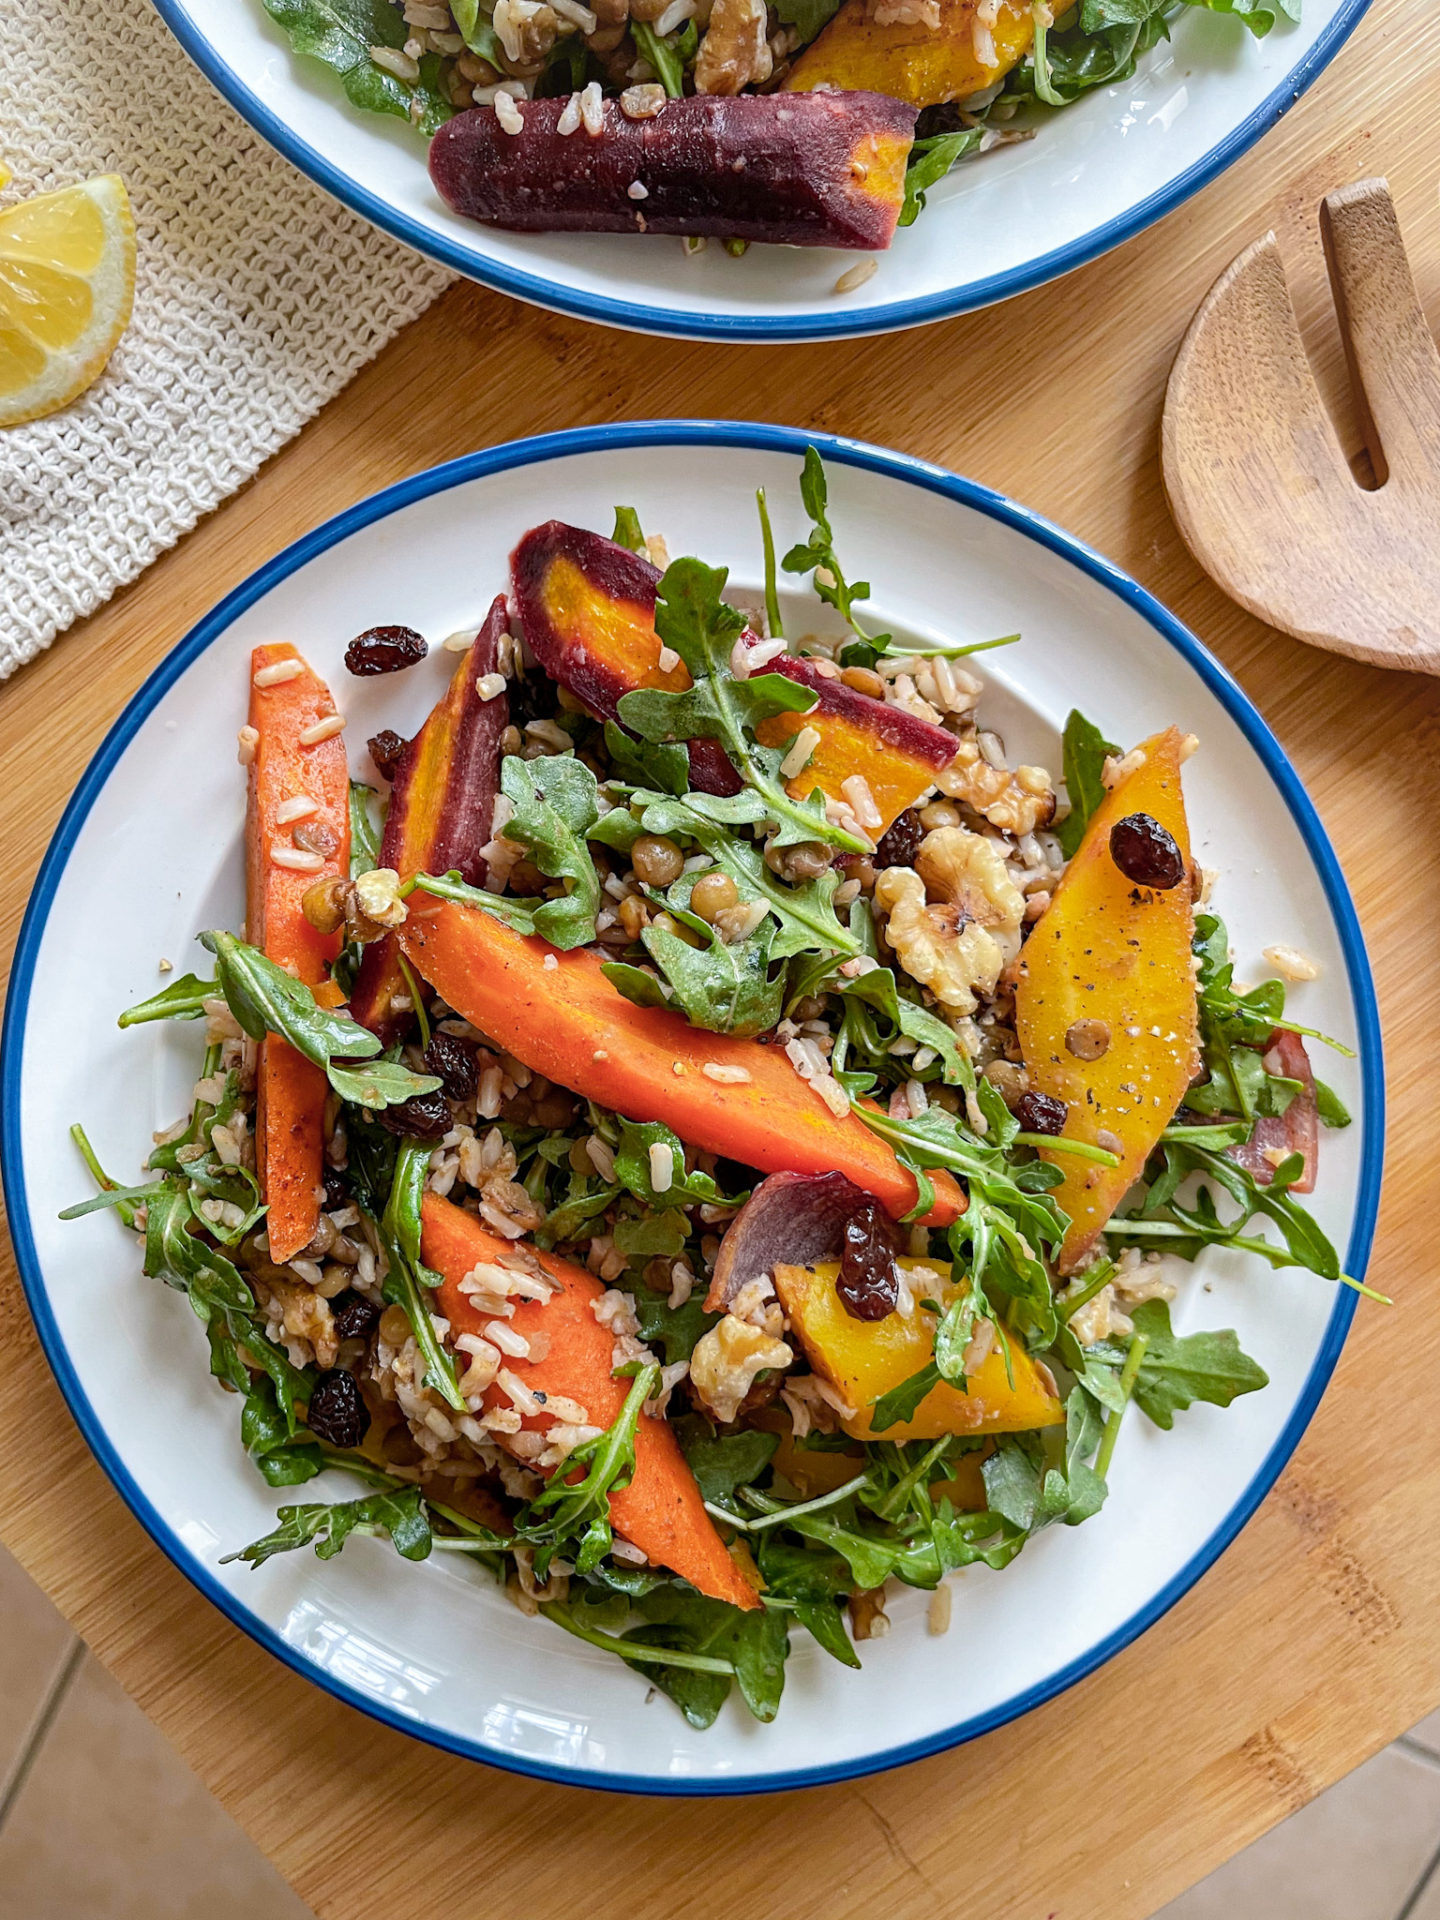 Carrot, Lentil, and Arugula Salad with Miso Brown Rice and Walnuts